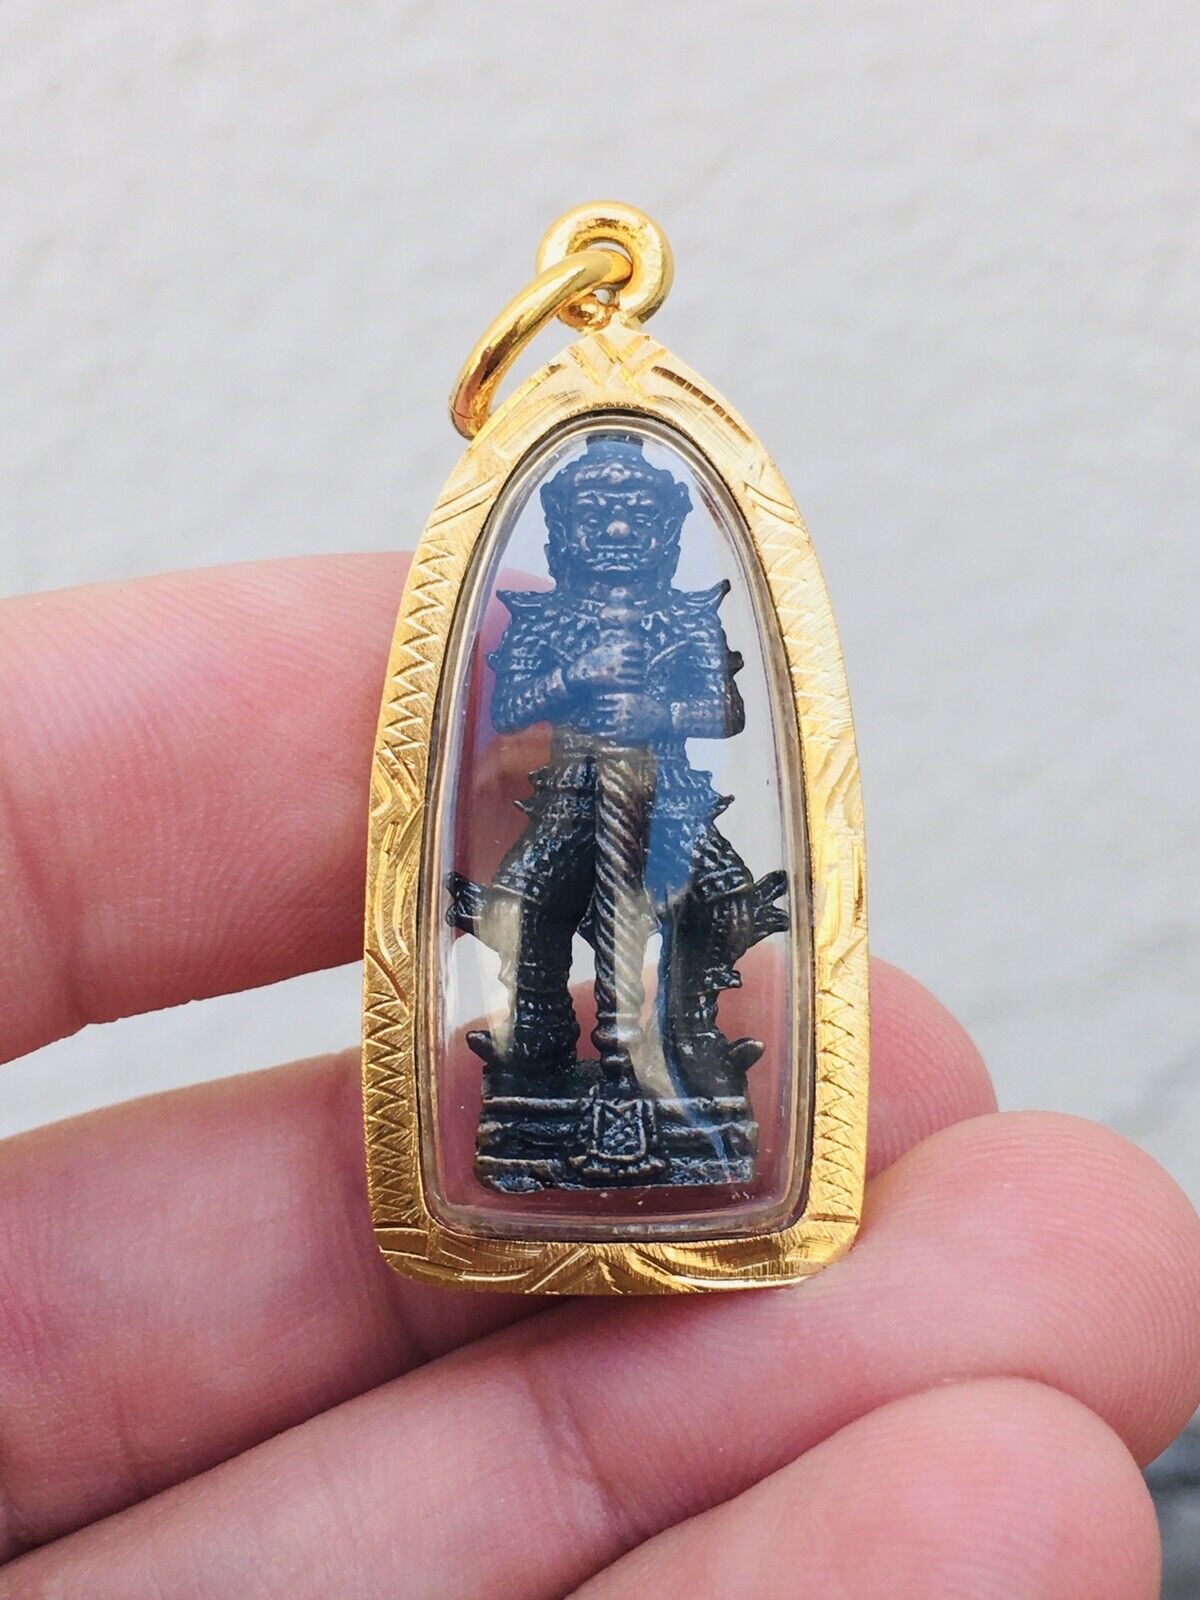 Gorgeous Mini Thao Vessuwan Wessuwan Amulet Charm Luck Protection Vol. 3.3.3